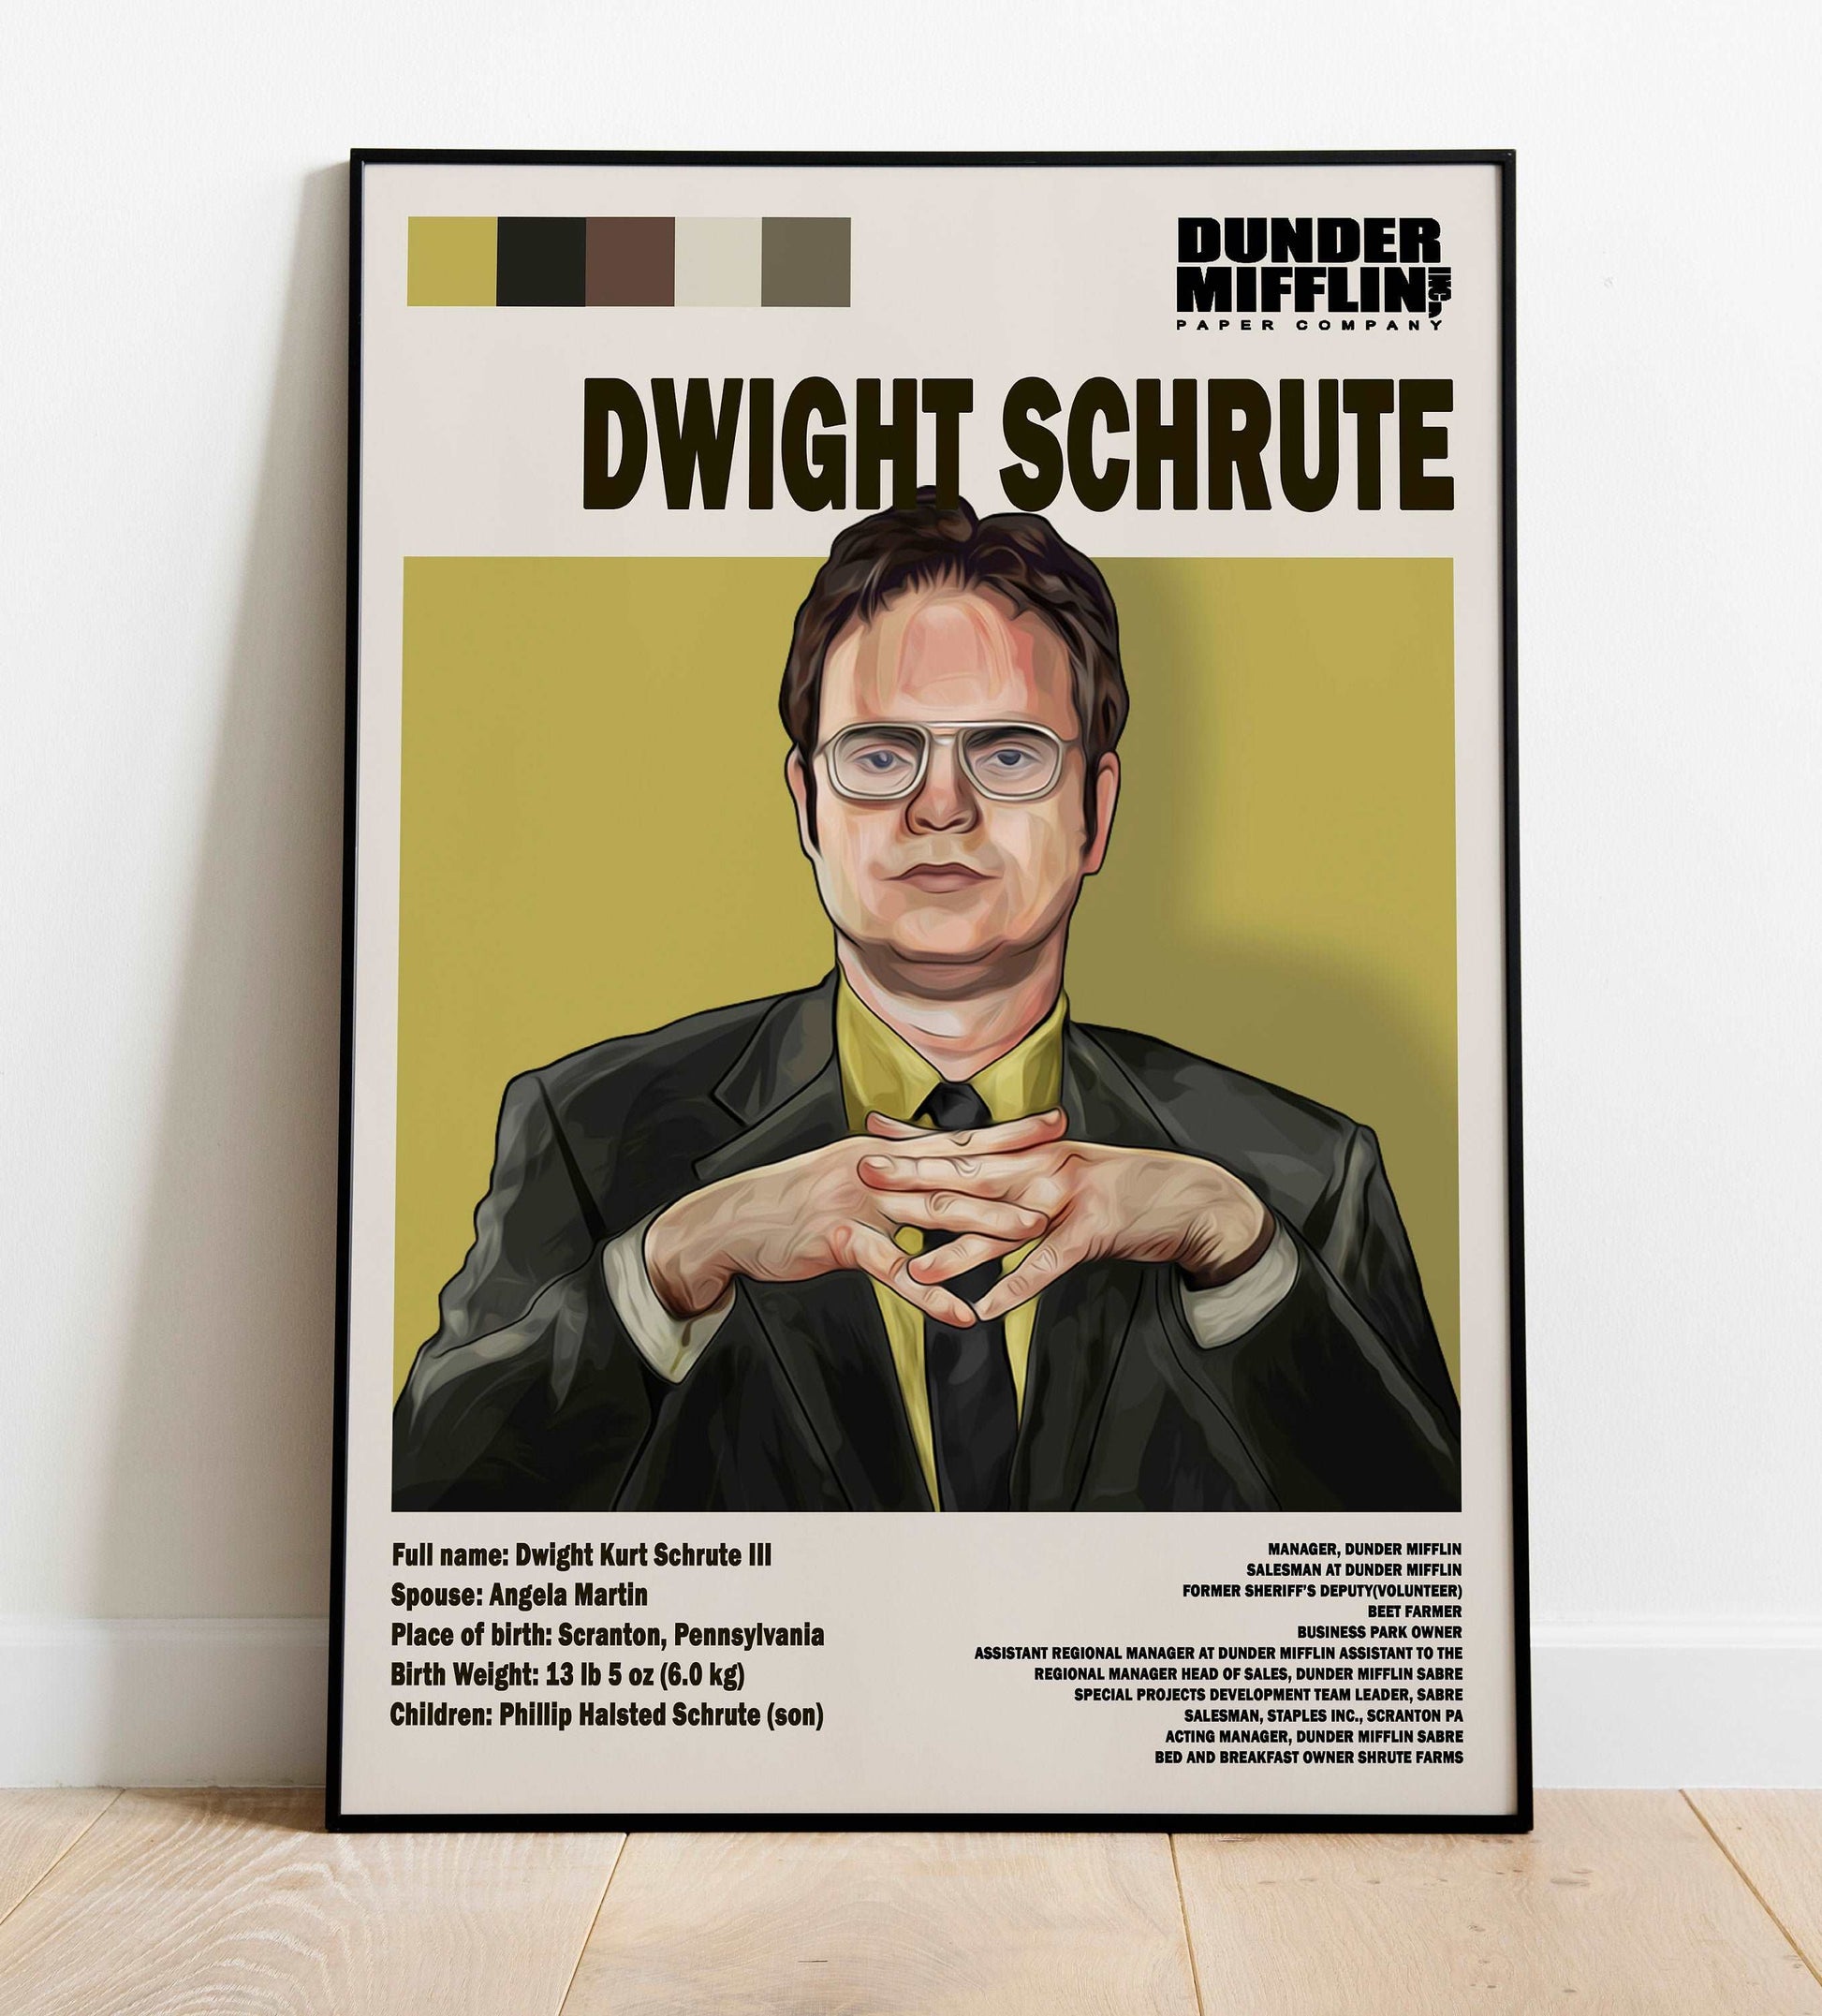 Dwight Shrute The Office (US) - Poster Kingz